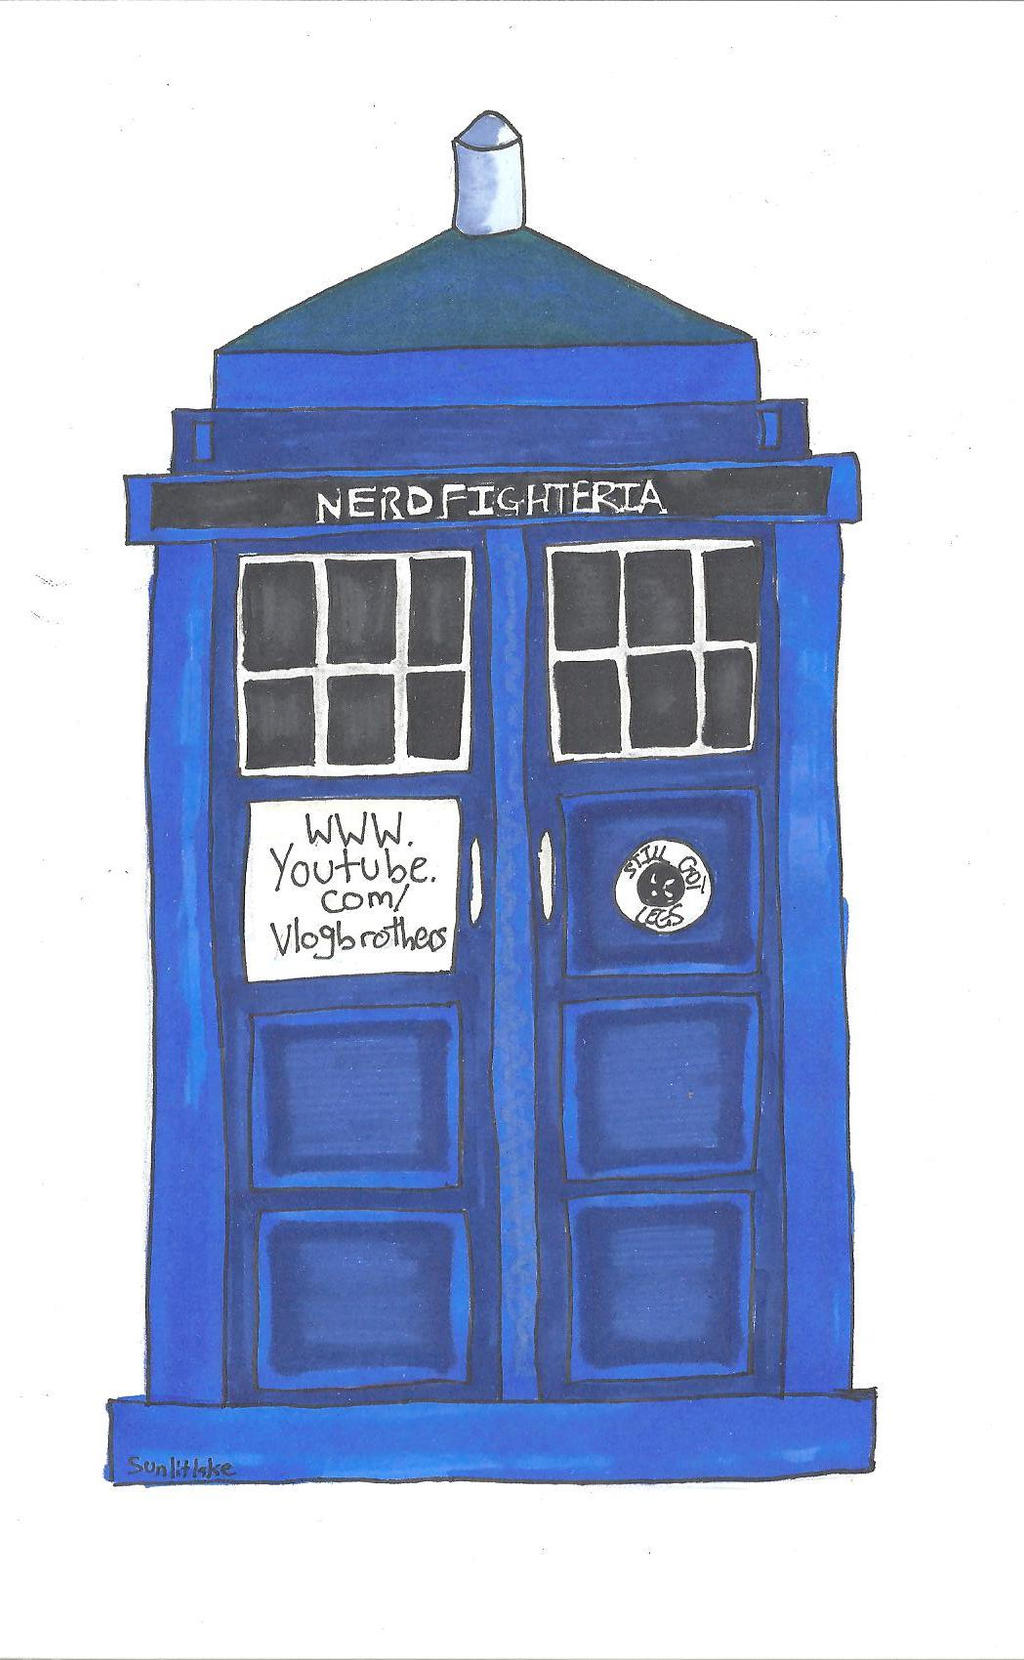 The Nerdfighters have the Phonebox